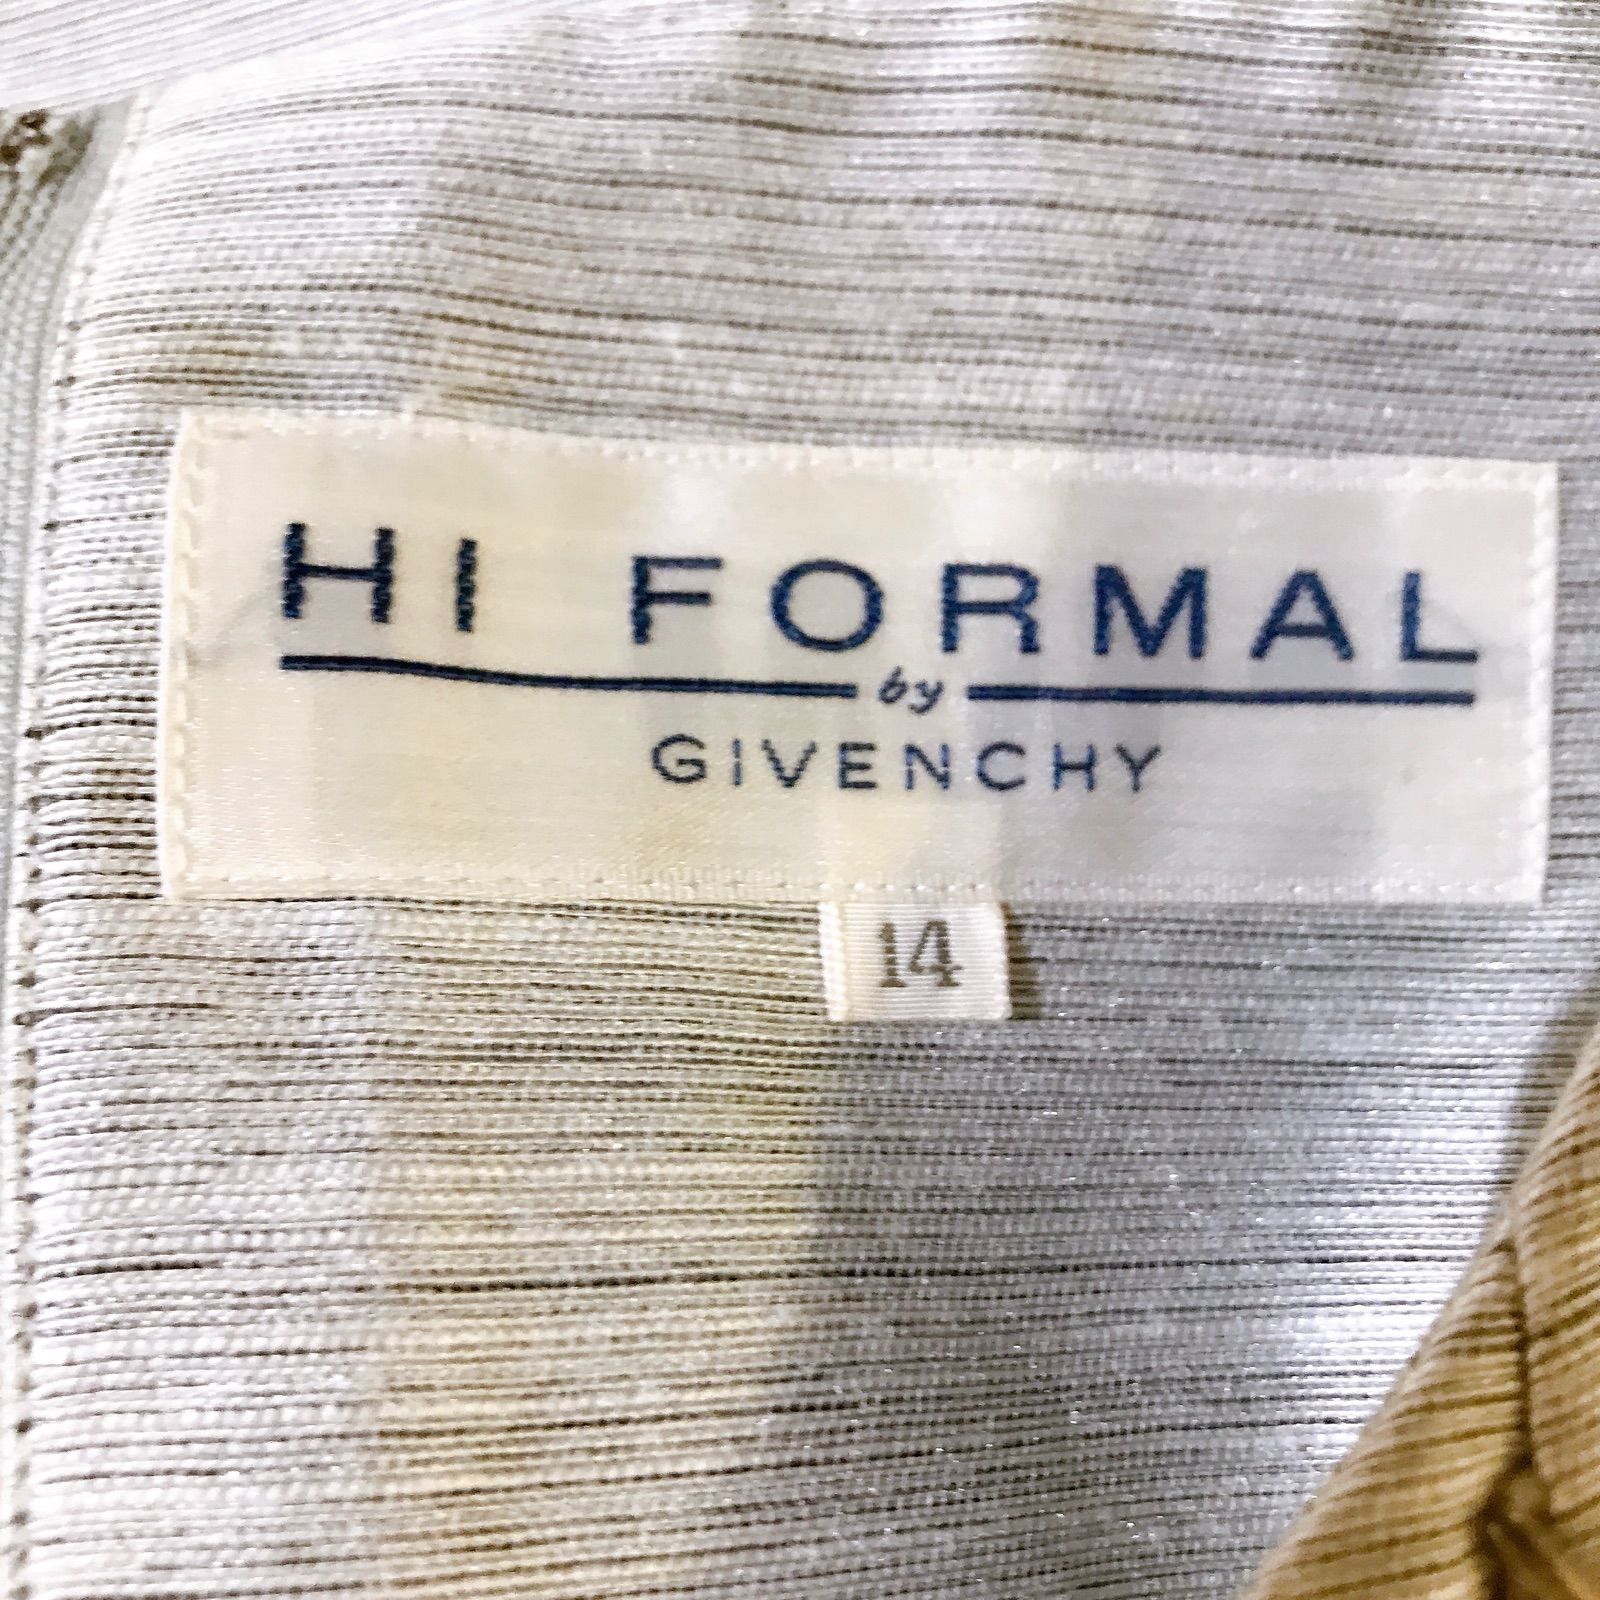 HI FORMAL by GIVENCHY ジバンシー セットアップ ノースリーブ 